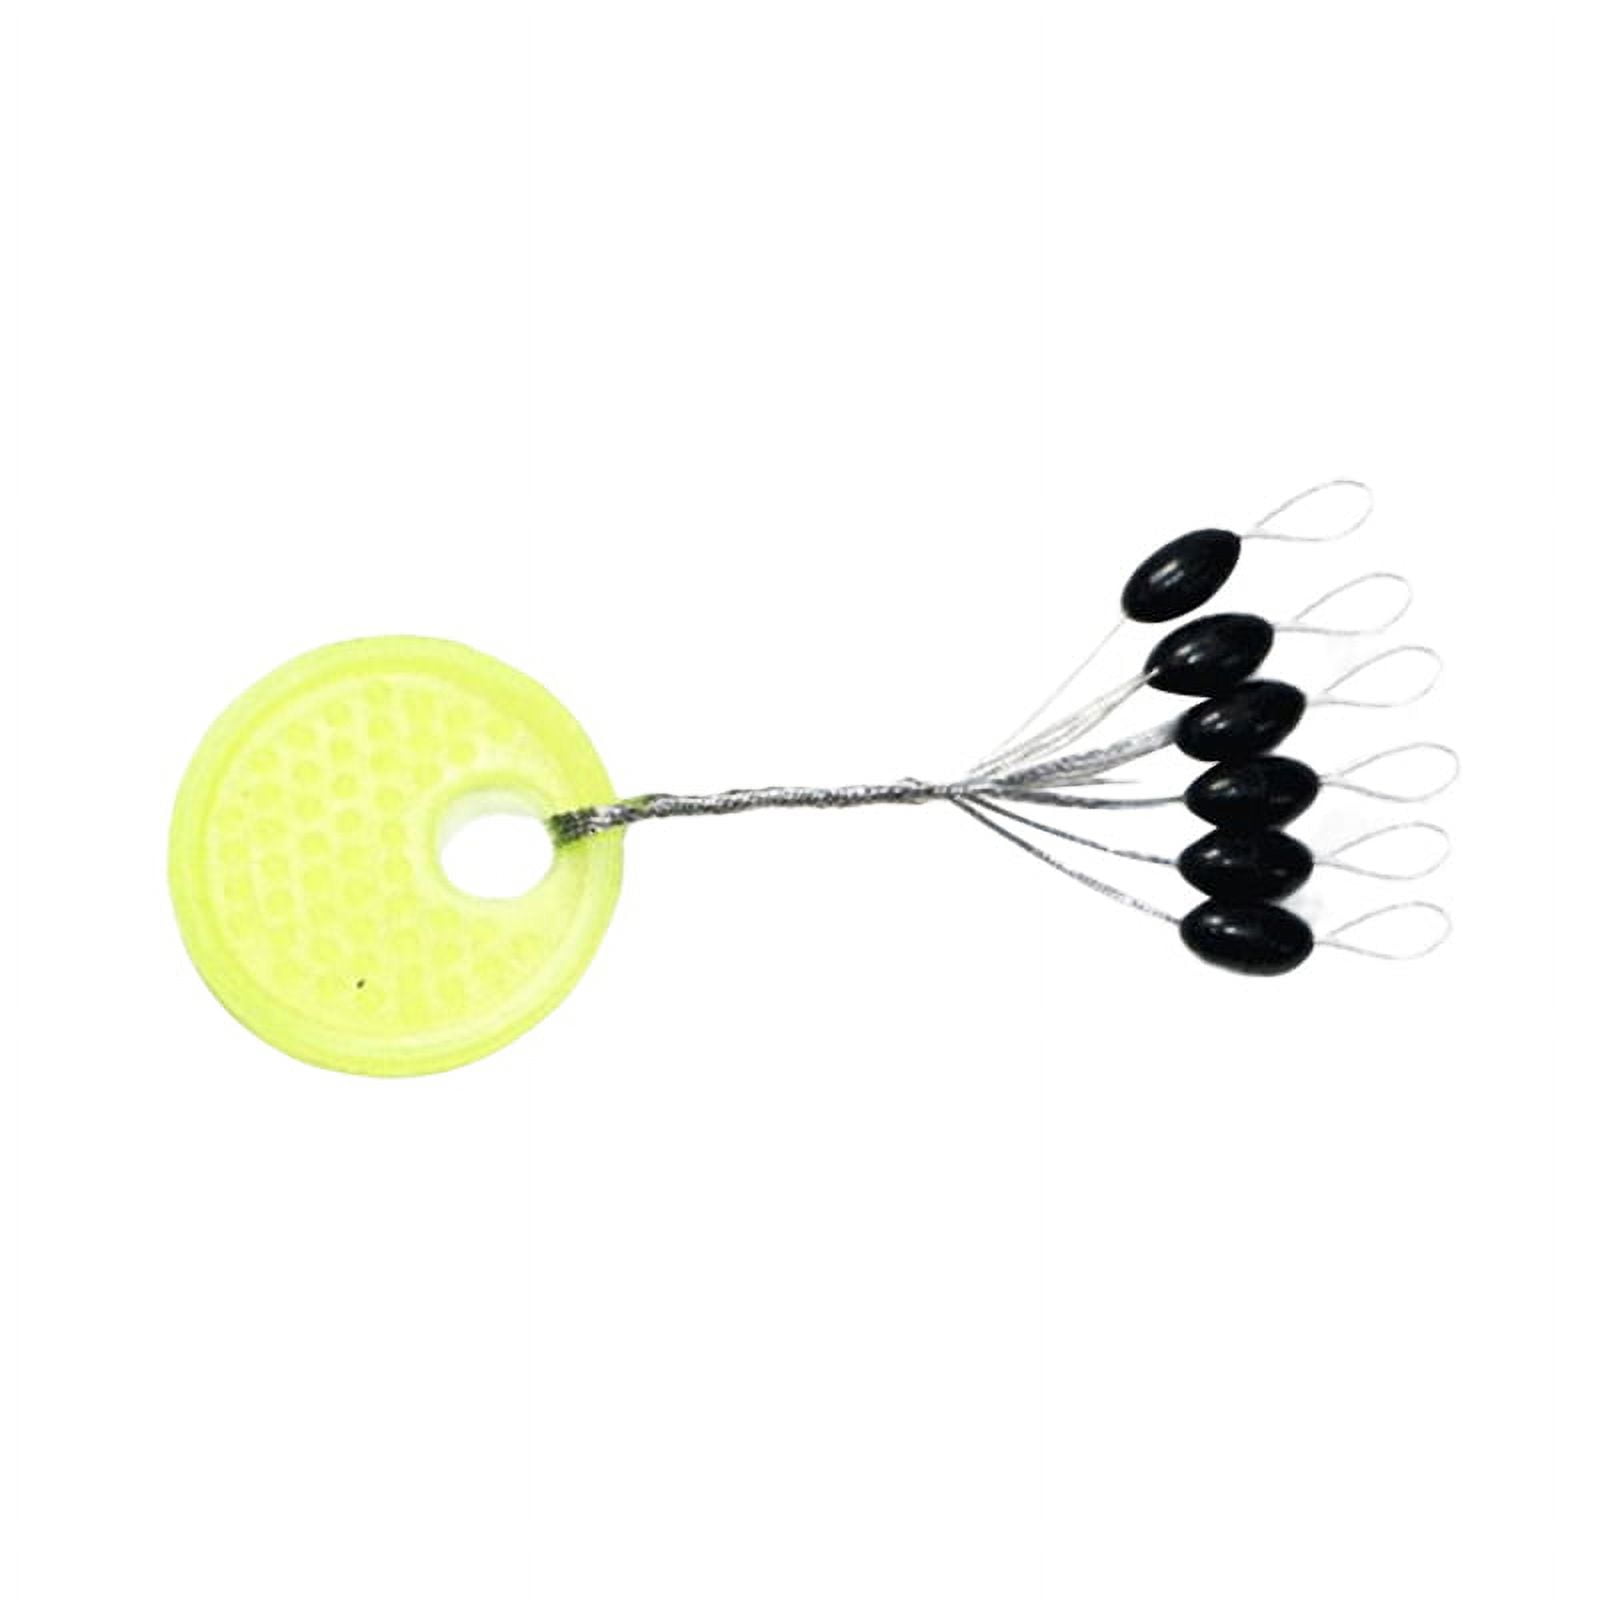 Rubber Fishing Bobber Stopper, 6 in 1 Float Sinker Stops, Oval Cylinder, L  M S Float Stop Available 